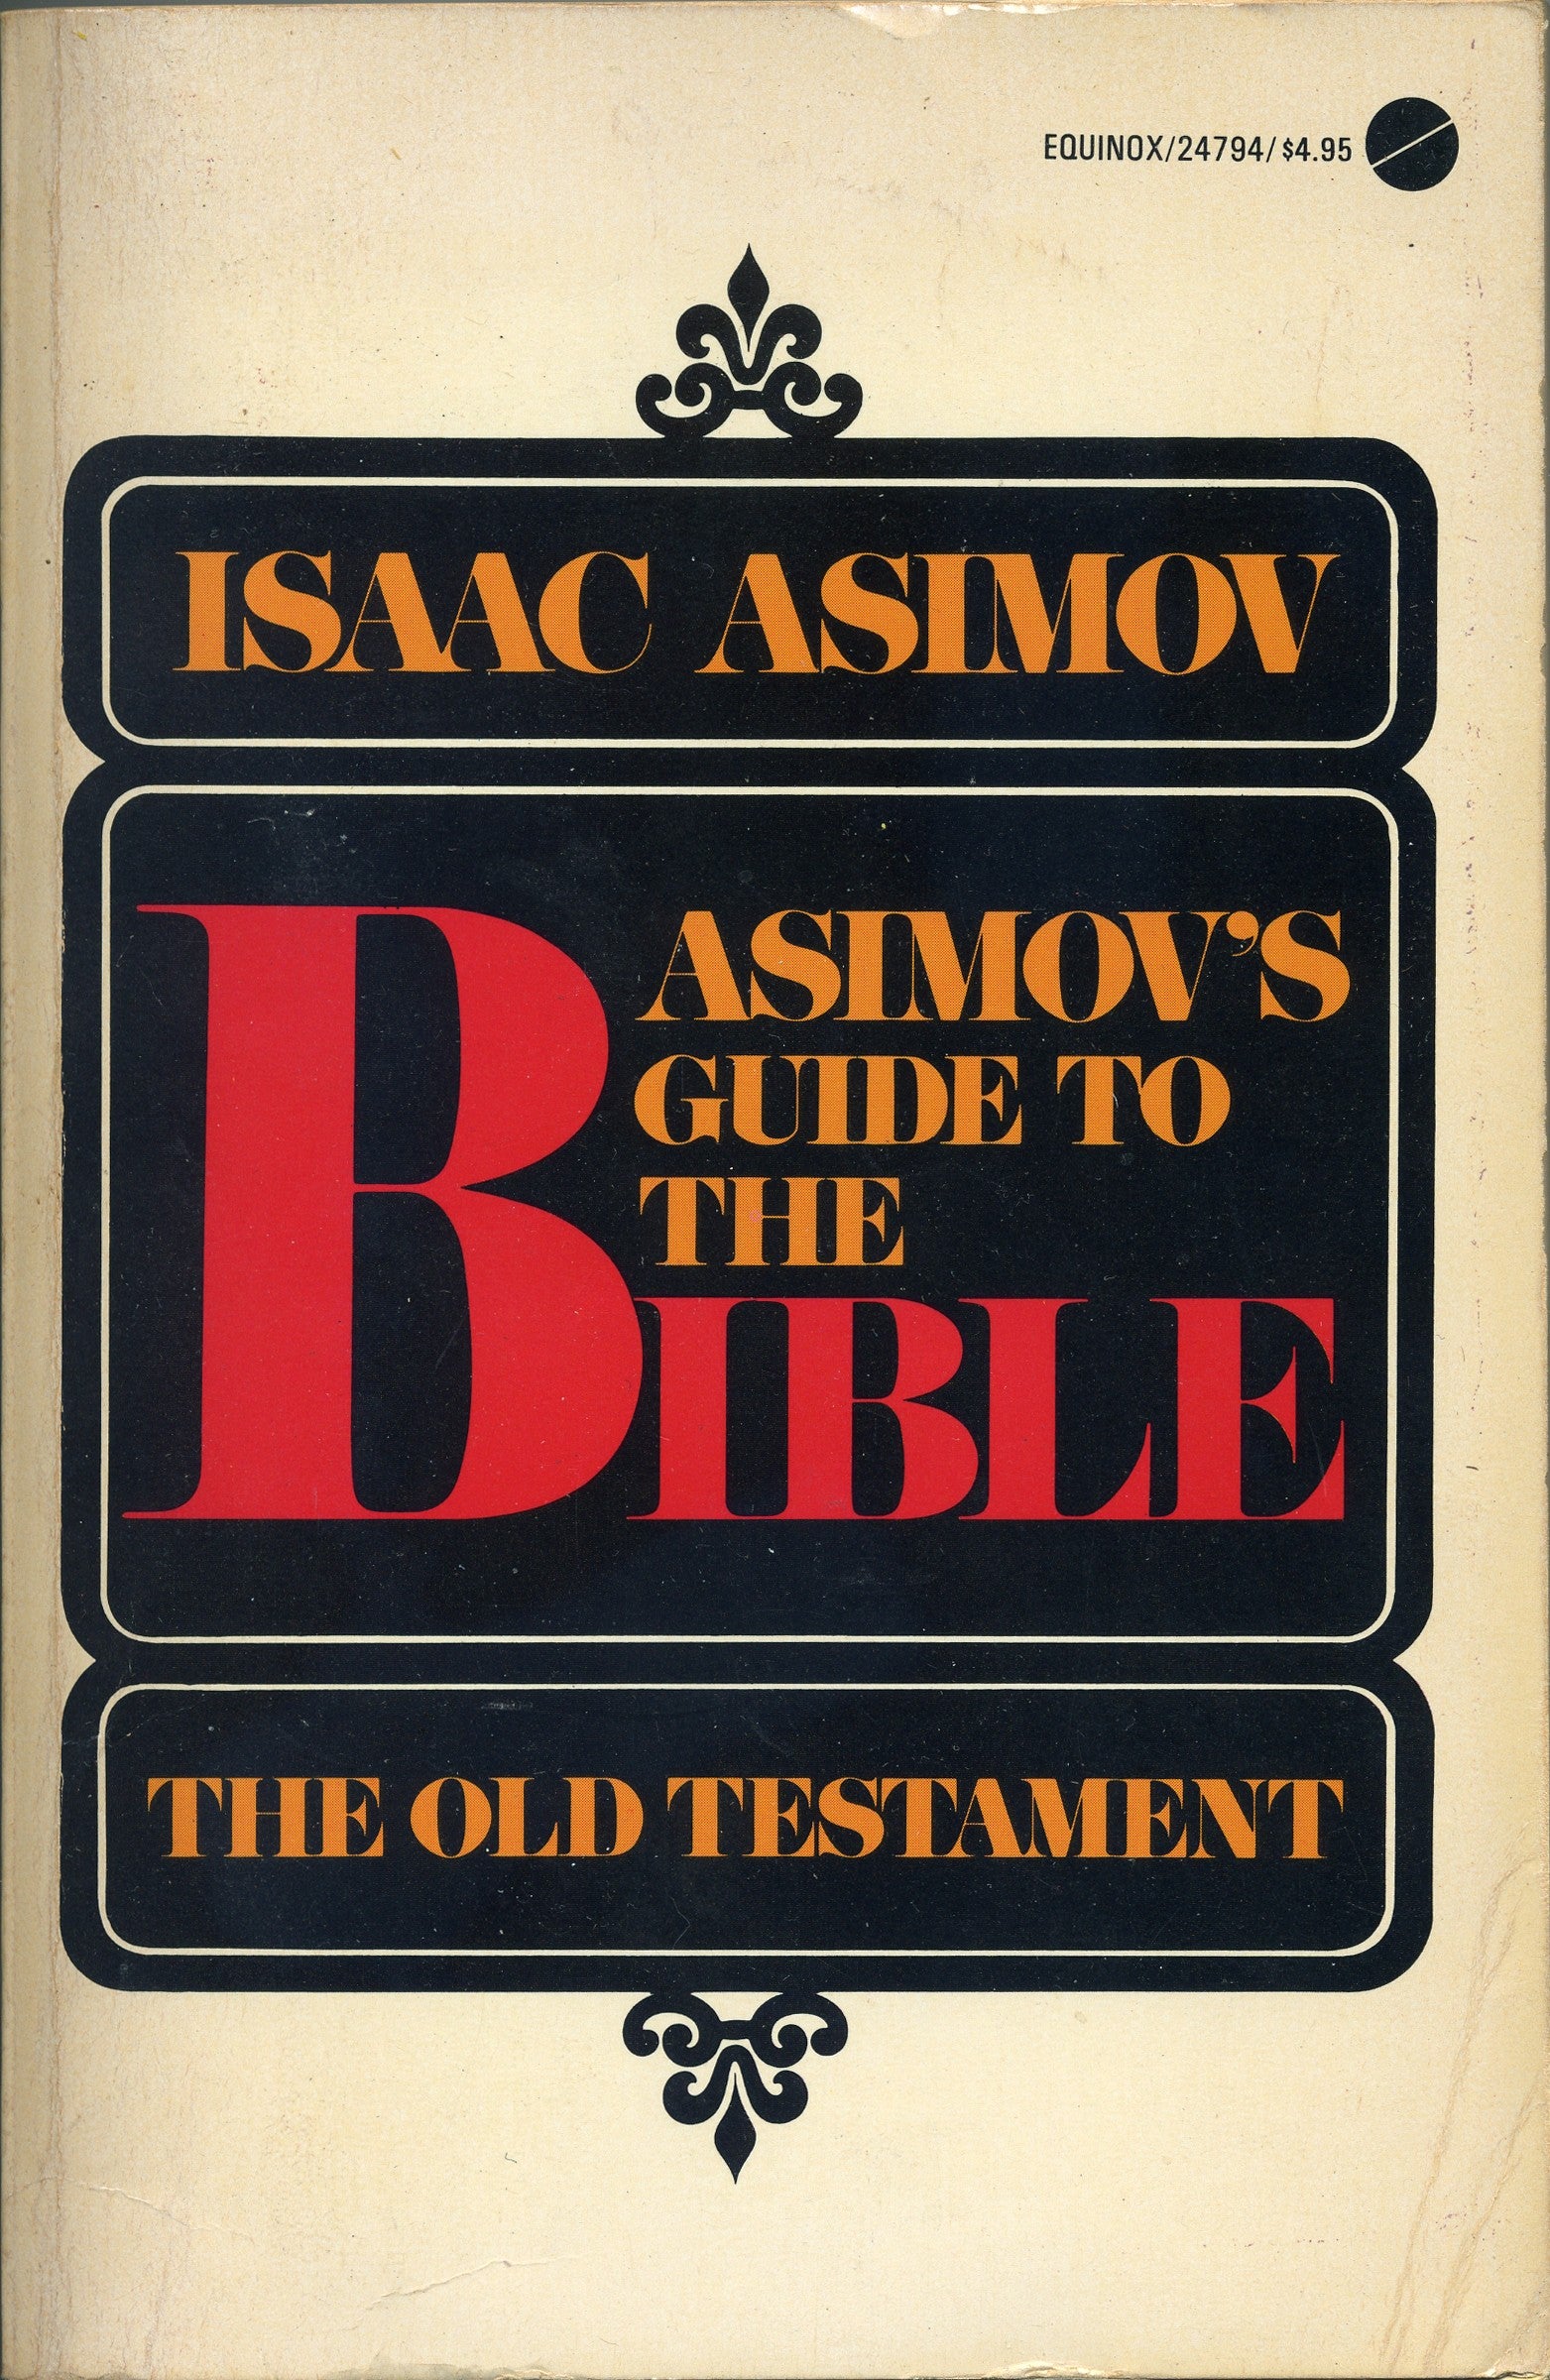 Asimov's Guide to the Bible: The Old Testament cover